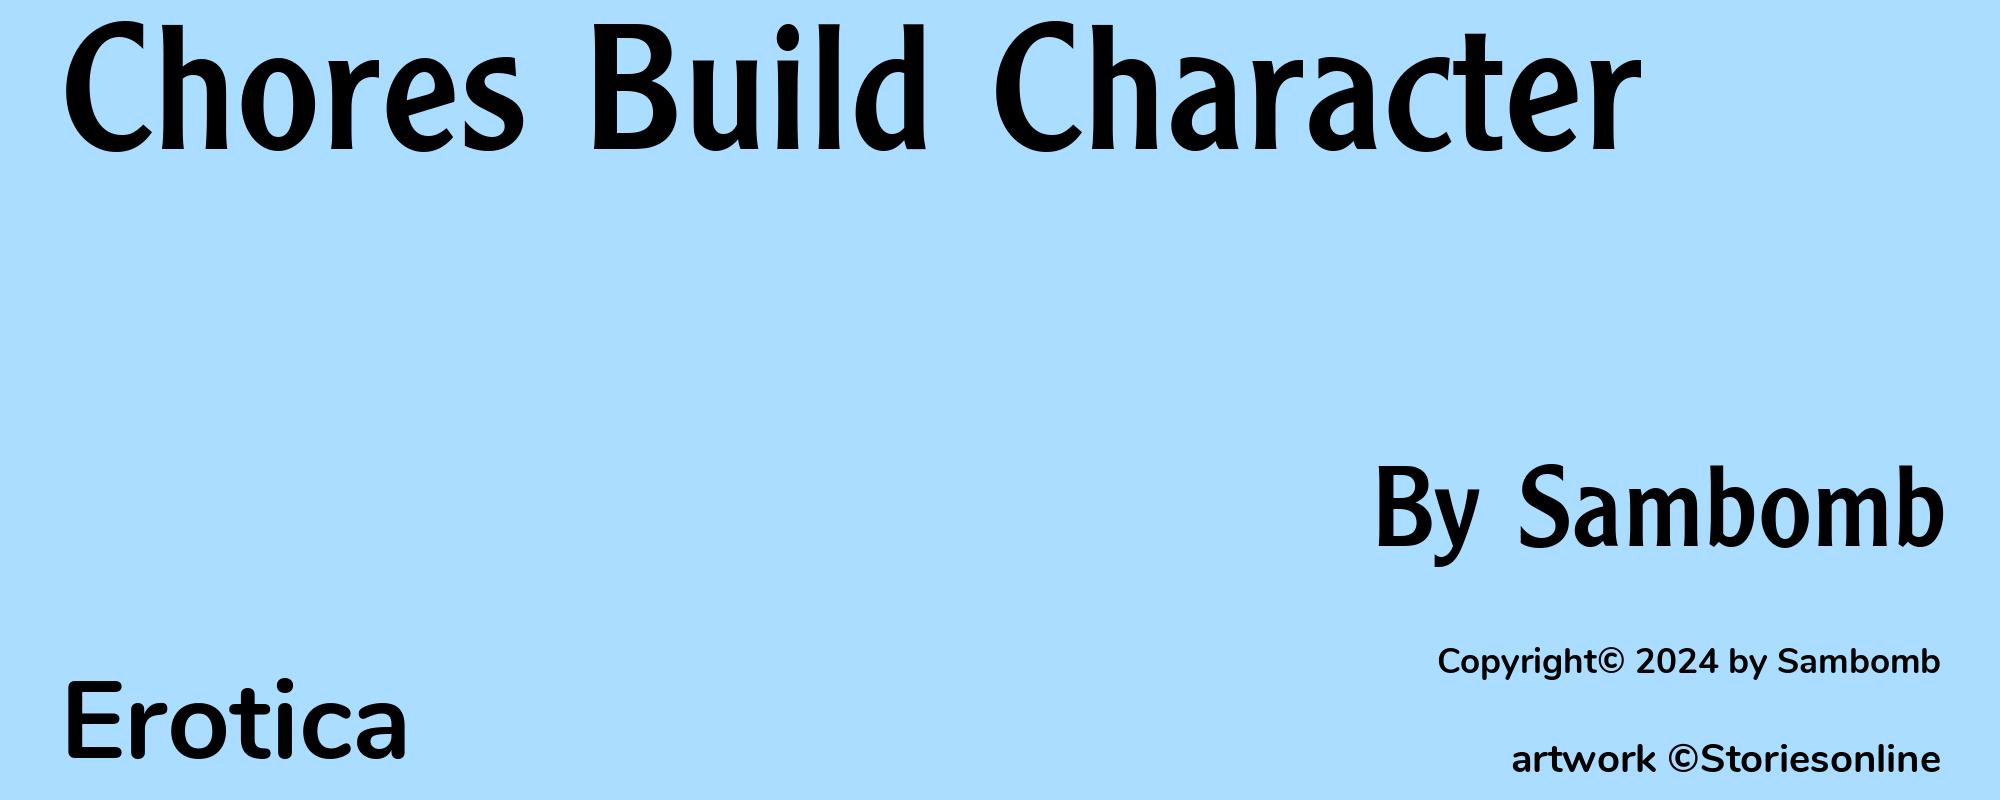 Chores Build Character - Cover